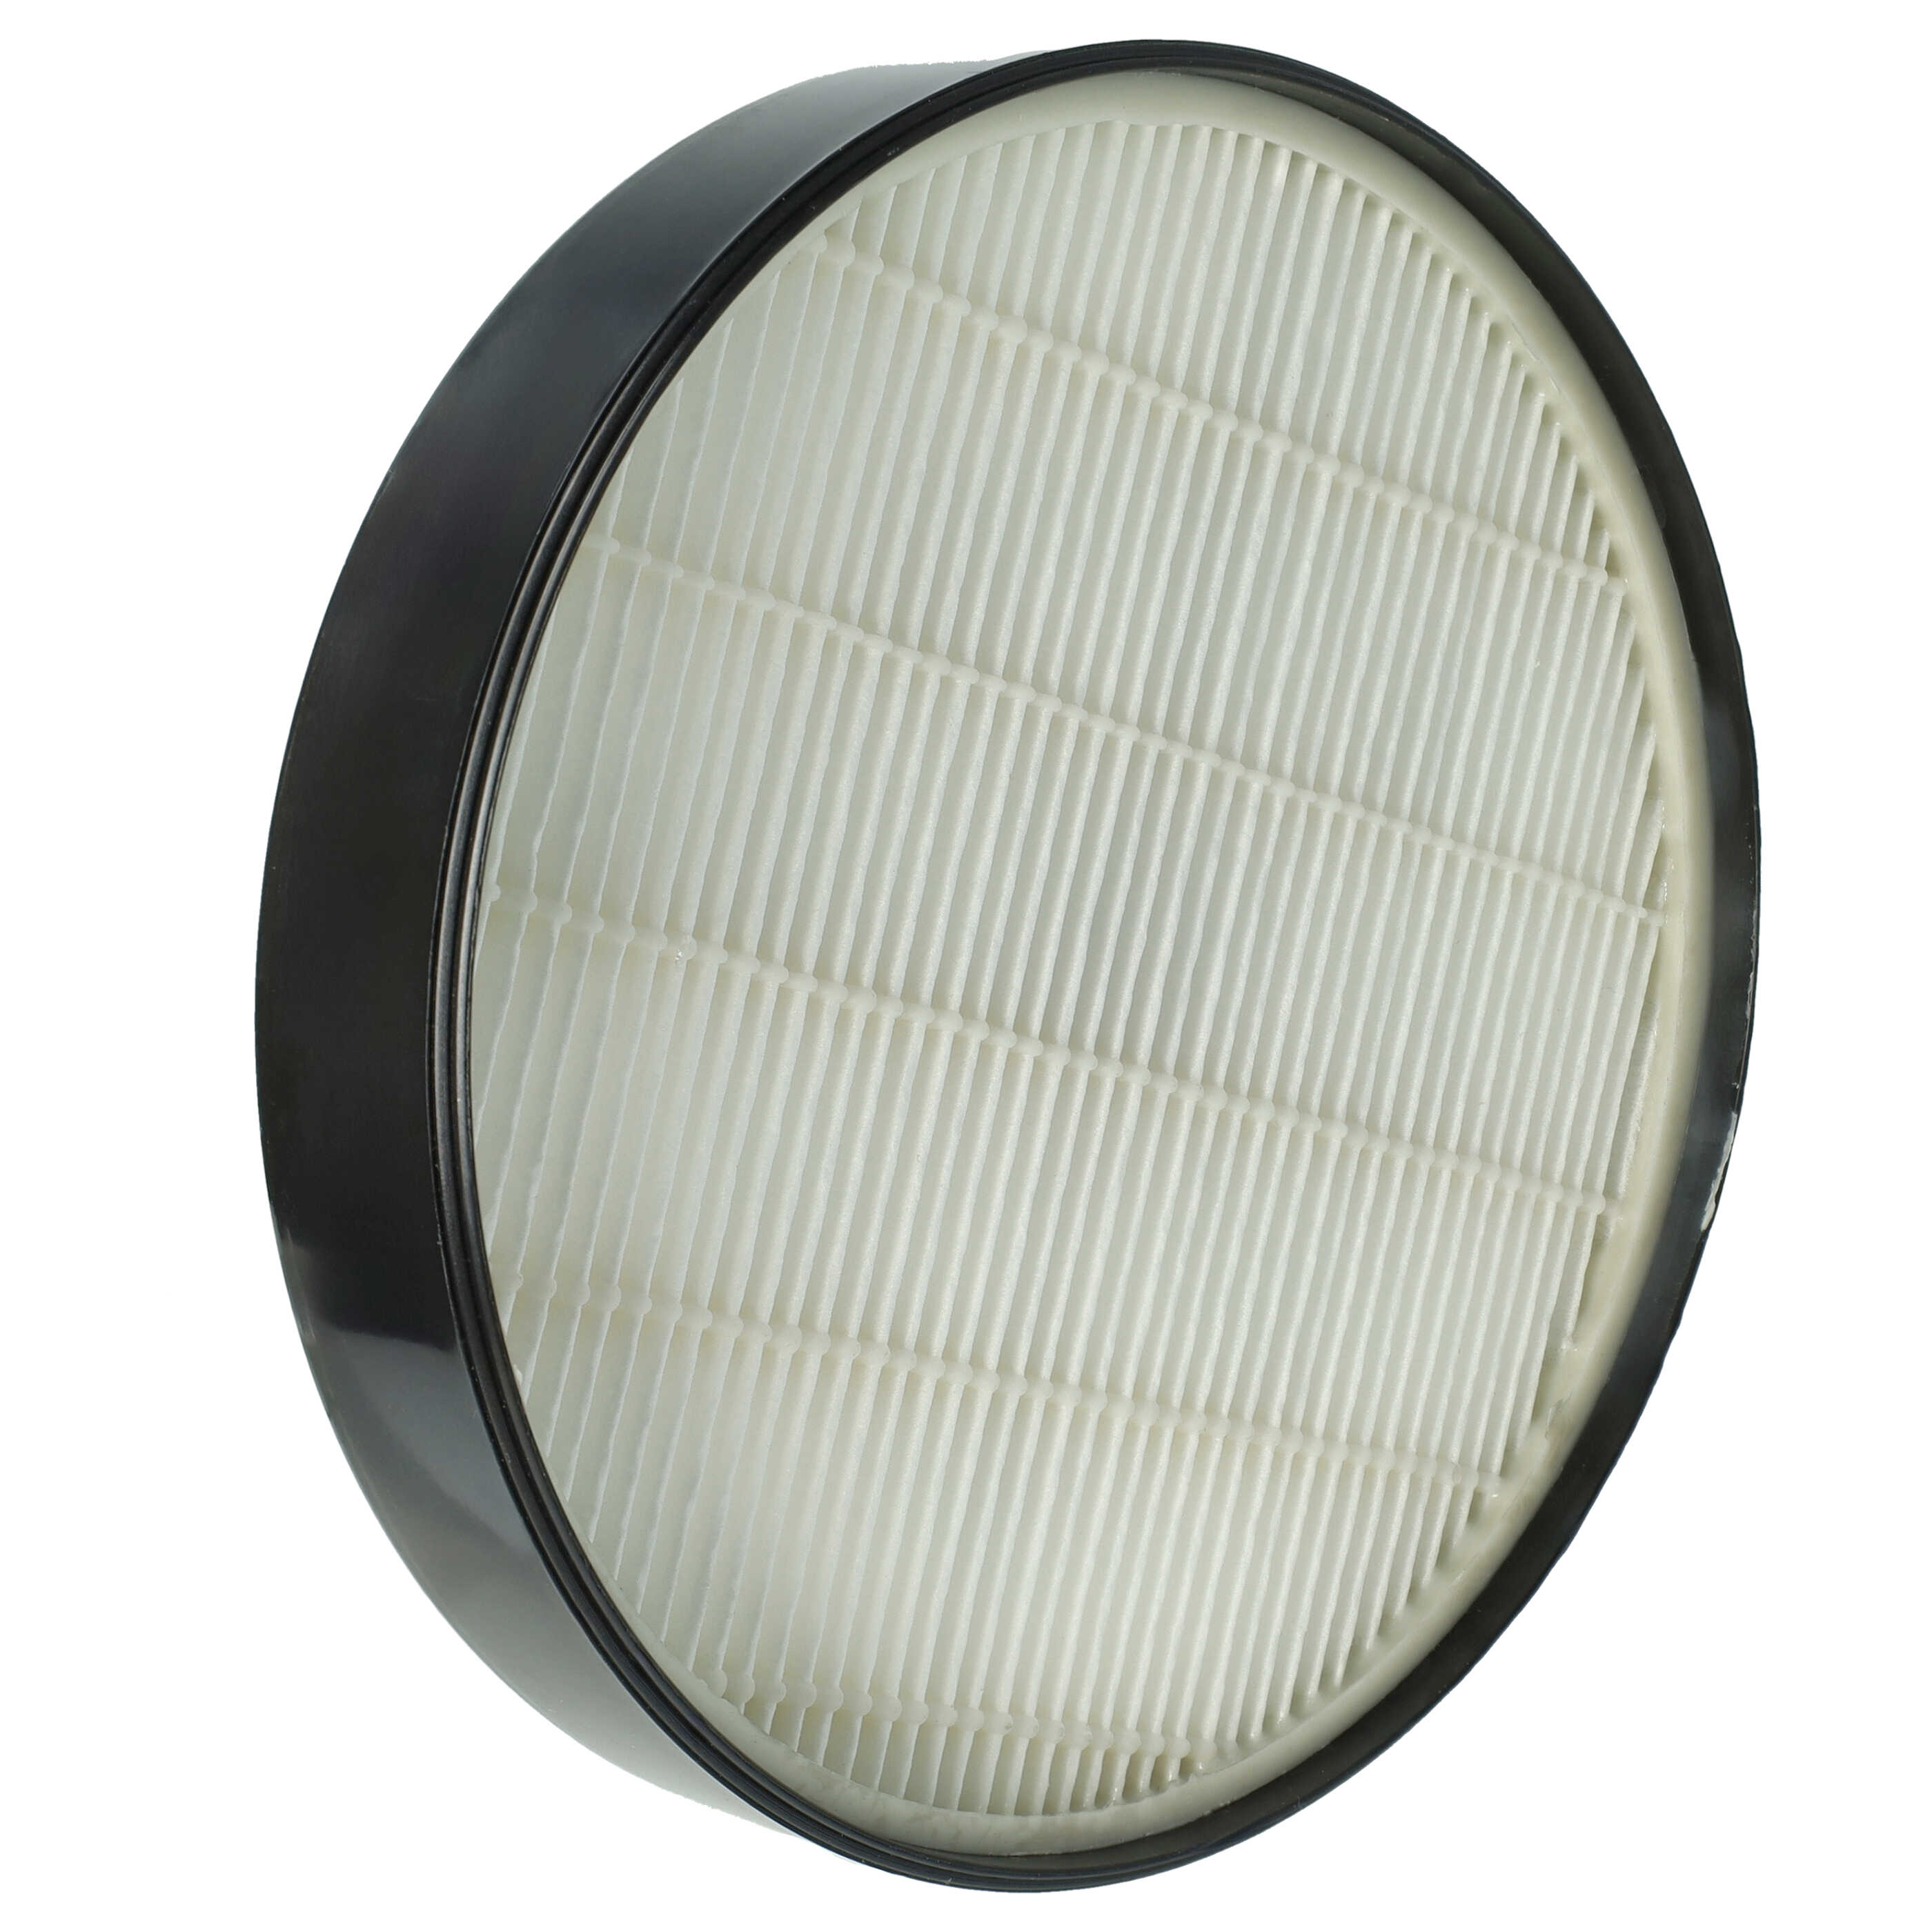 1x exhaust filter replaces Dirt Devil F49, 440001035 for Grundig Vacuum Cleaner